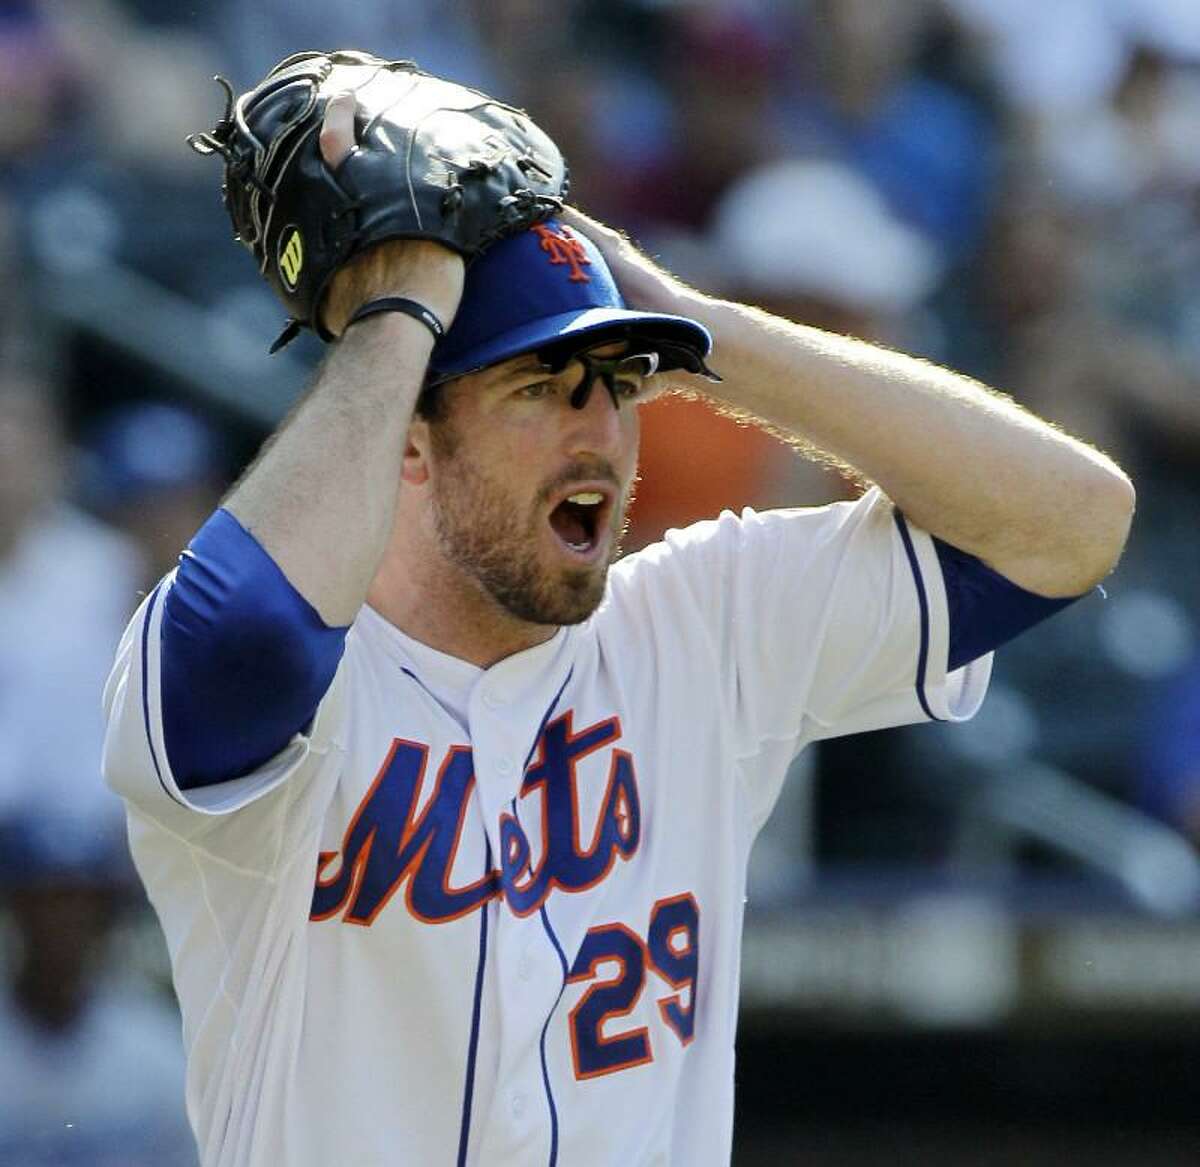 Loss to Dodgers puts Mets under .500 for first time this season